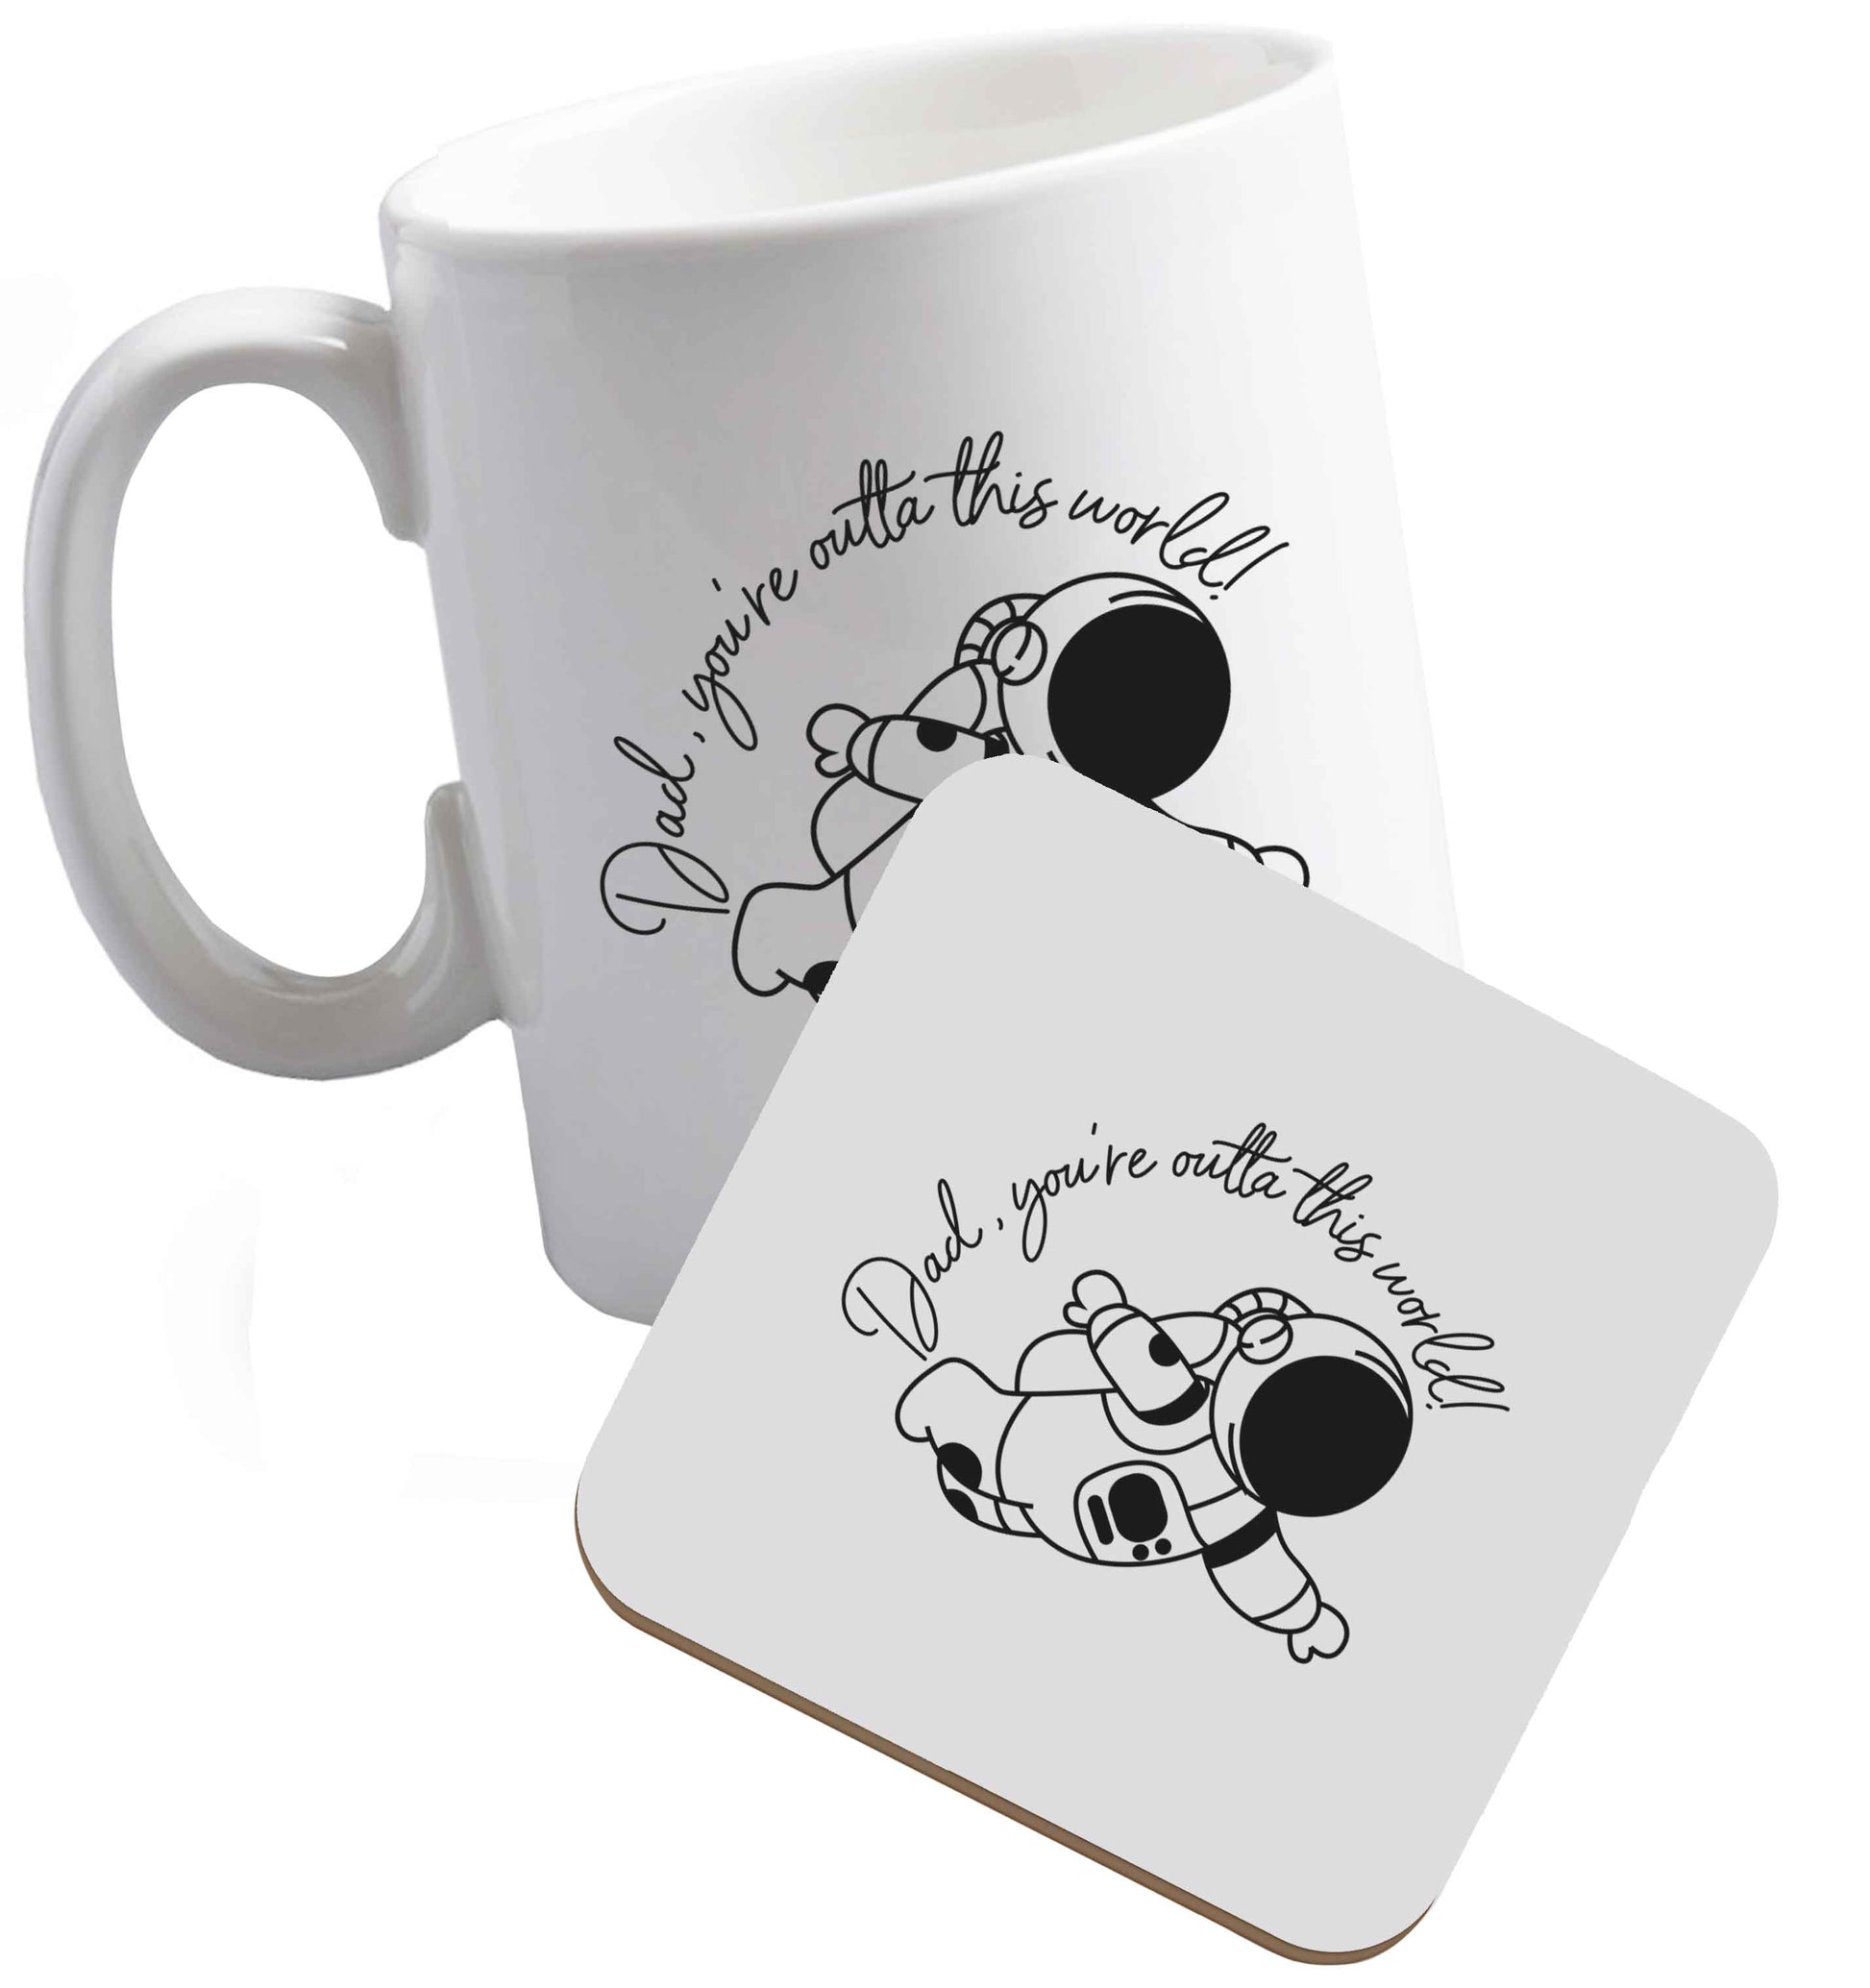 10 oz Dad, you're outta this world ceramic mug and coaster set right handed